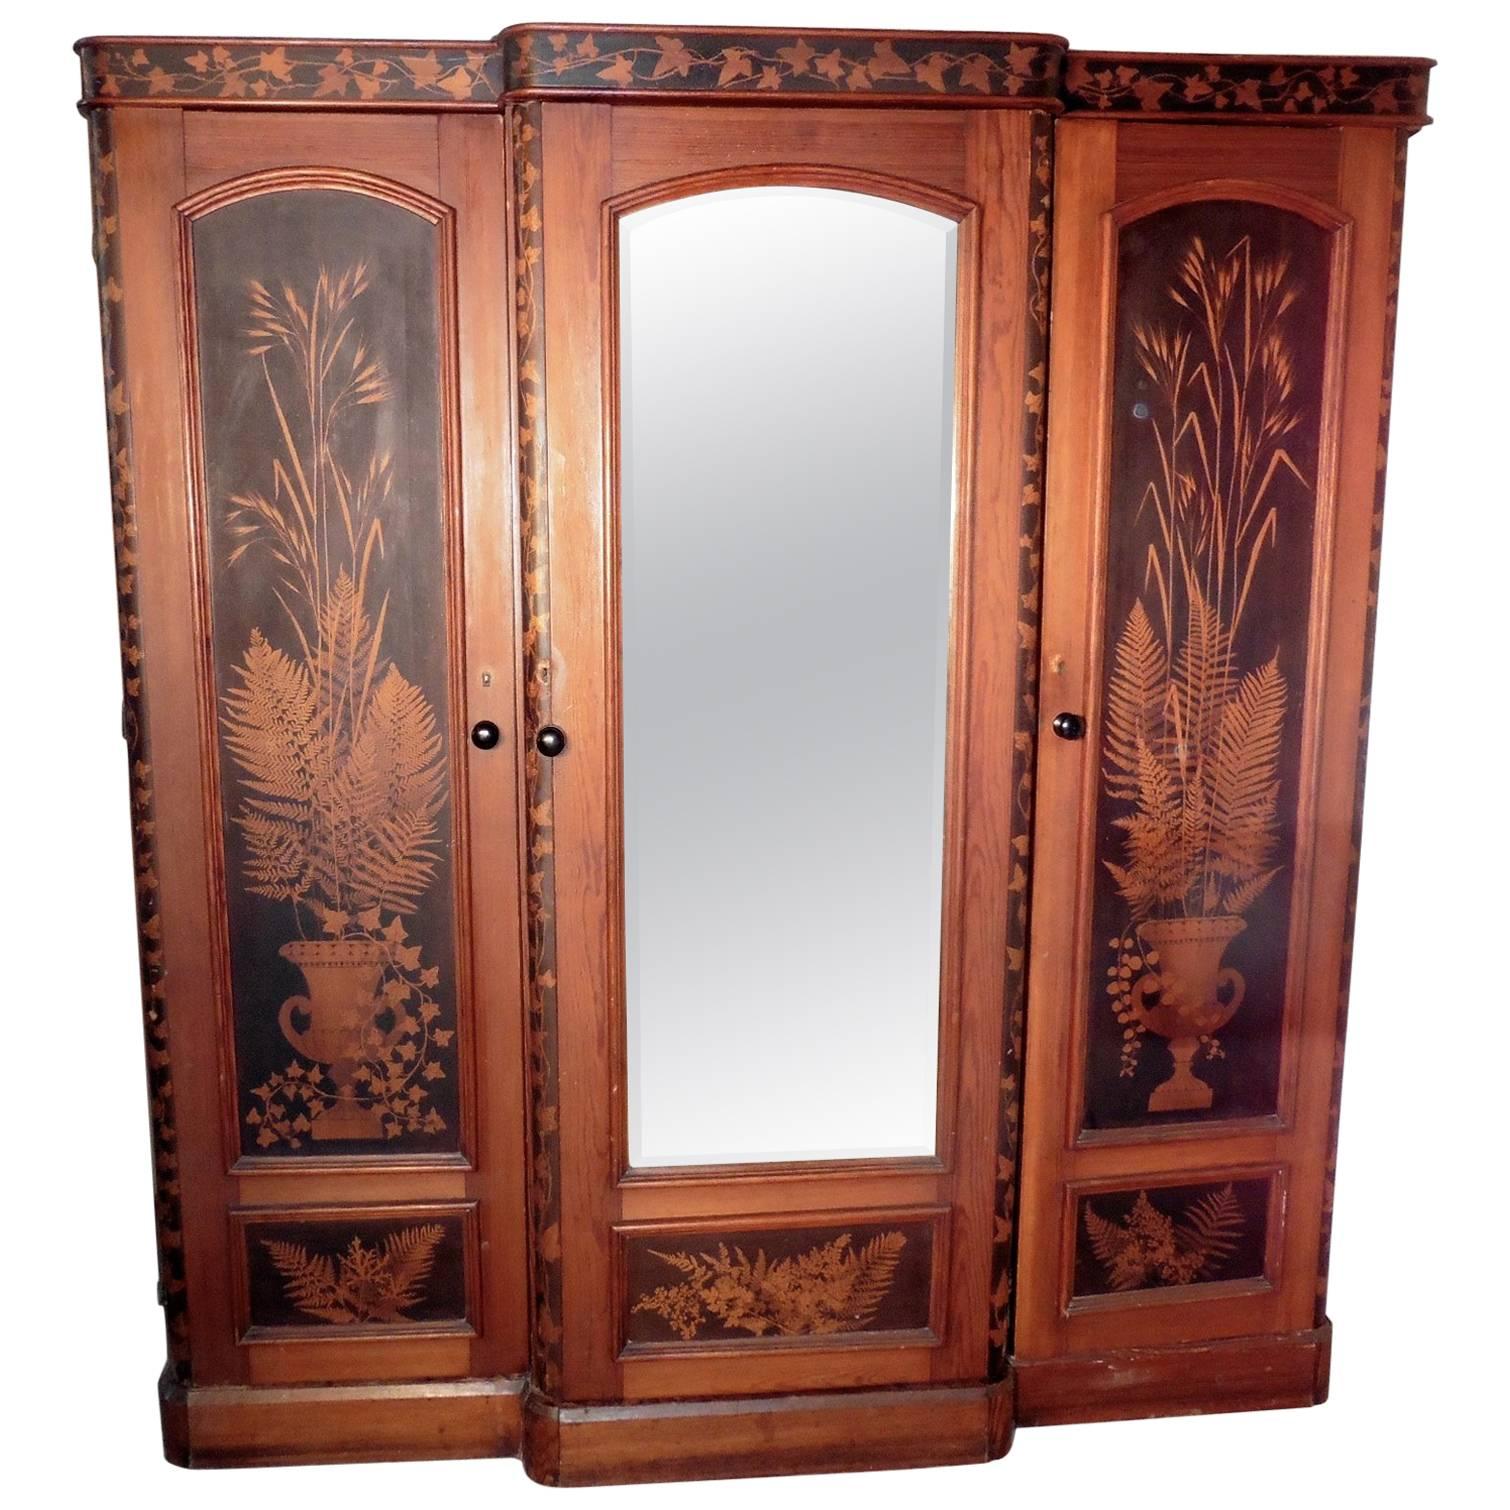 Victorian Painted Pine Arts & Crafts Wardrobe Decorated with Ferns and Leaves